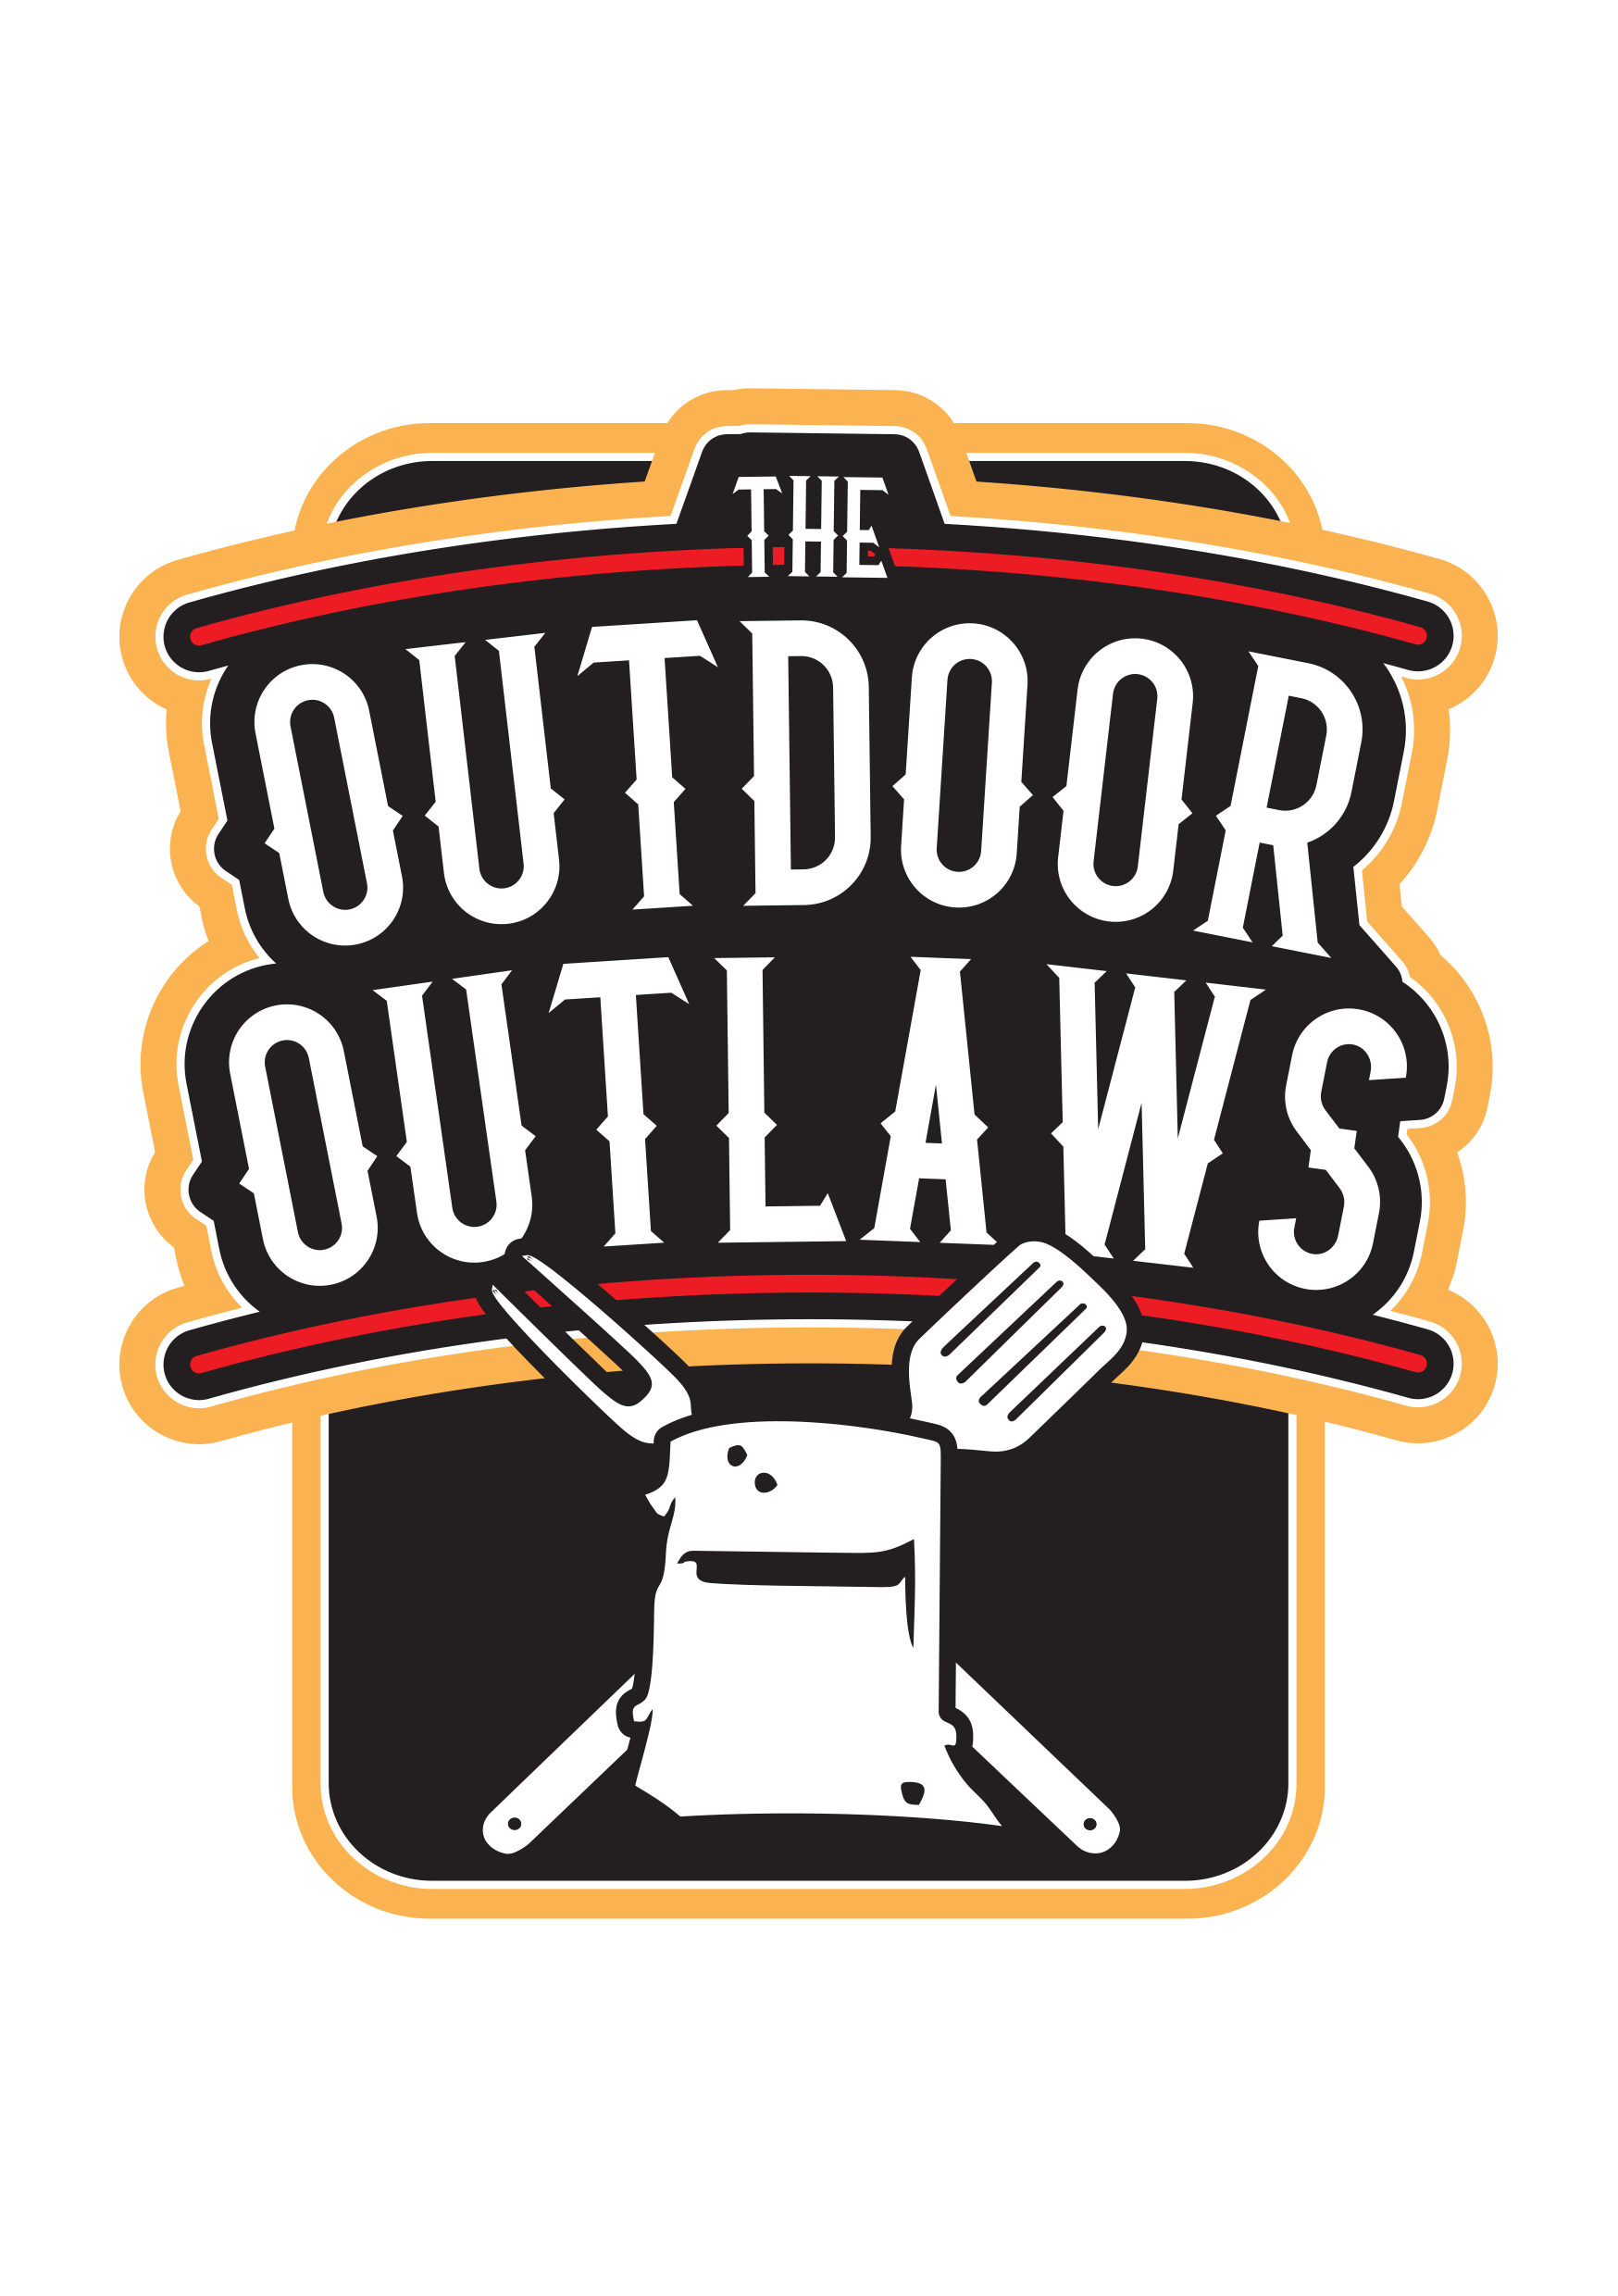 The Outdoor Outlaws